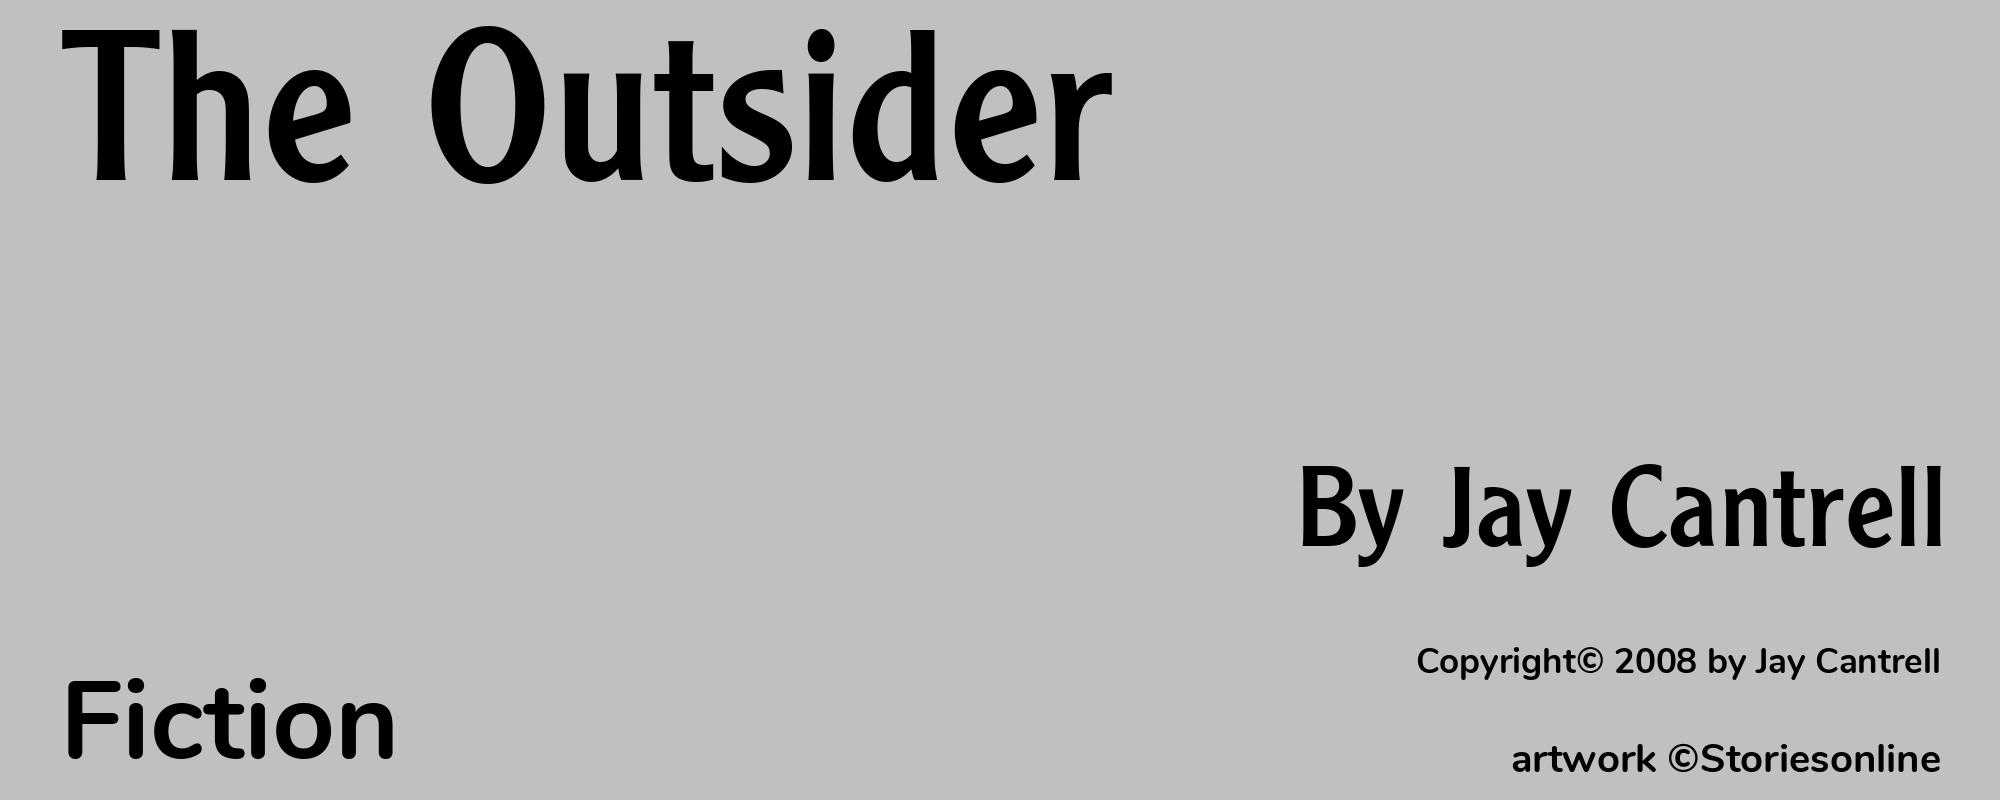 The Outsider - Cover